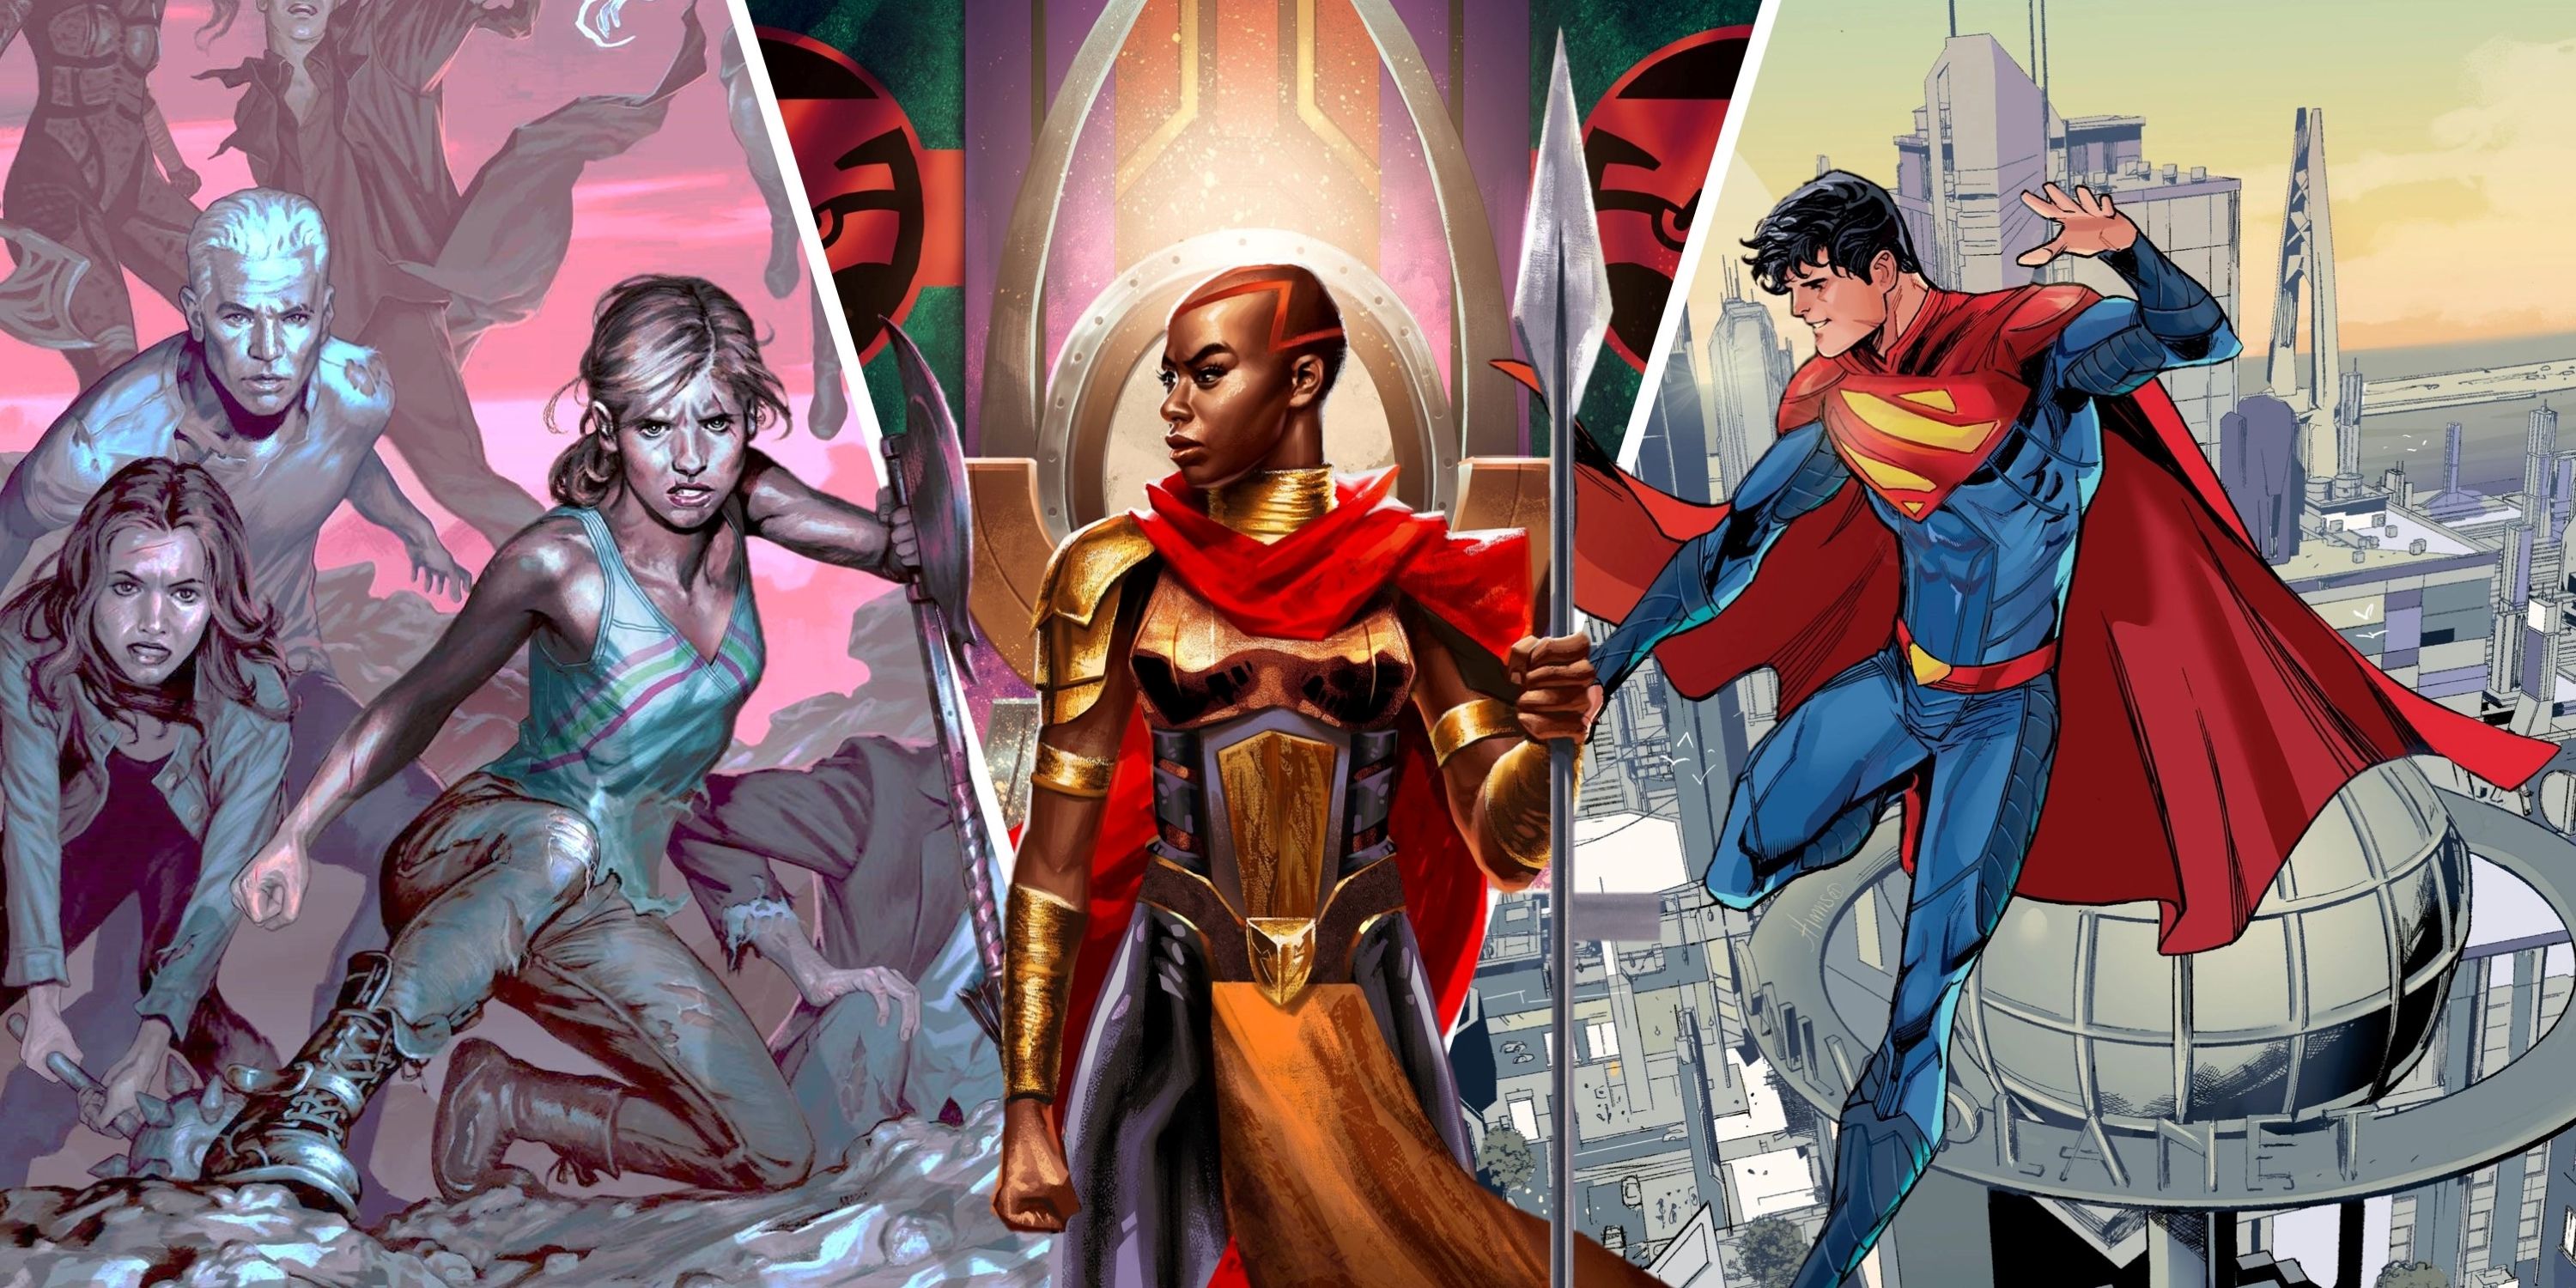 Composite of art from Buffy the Vampire Slayer, Black Panther and Superman comics